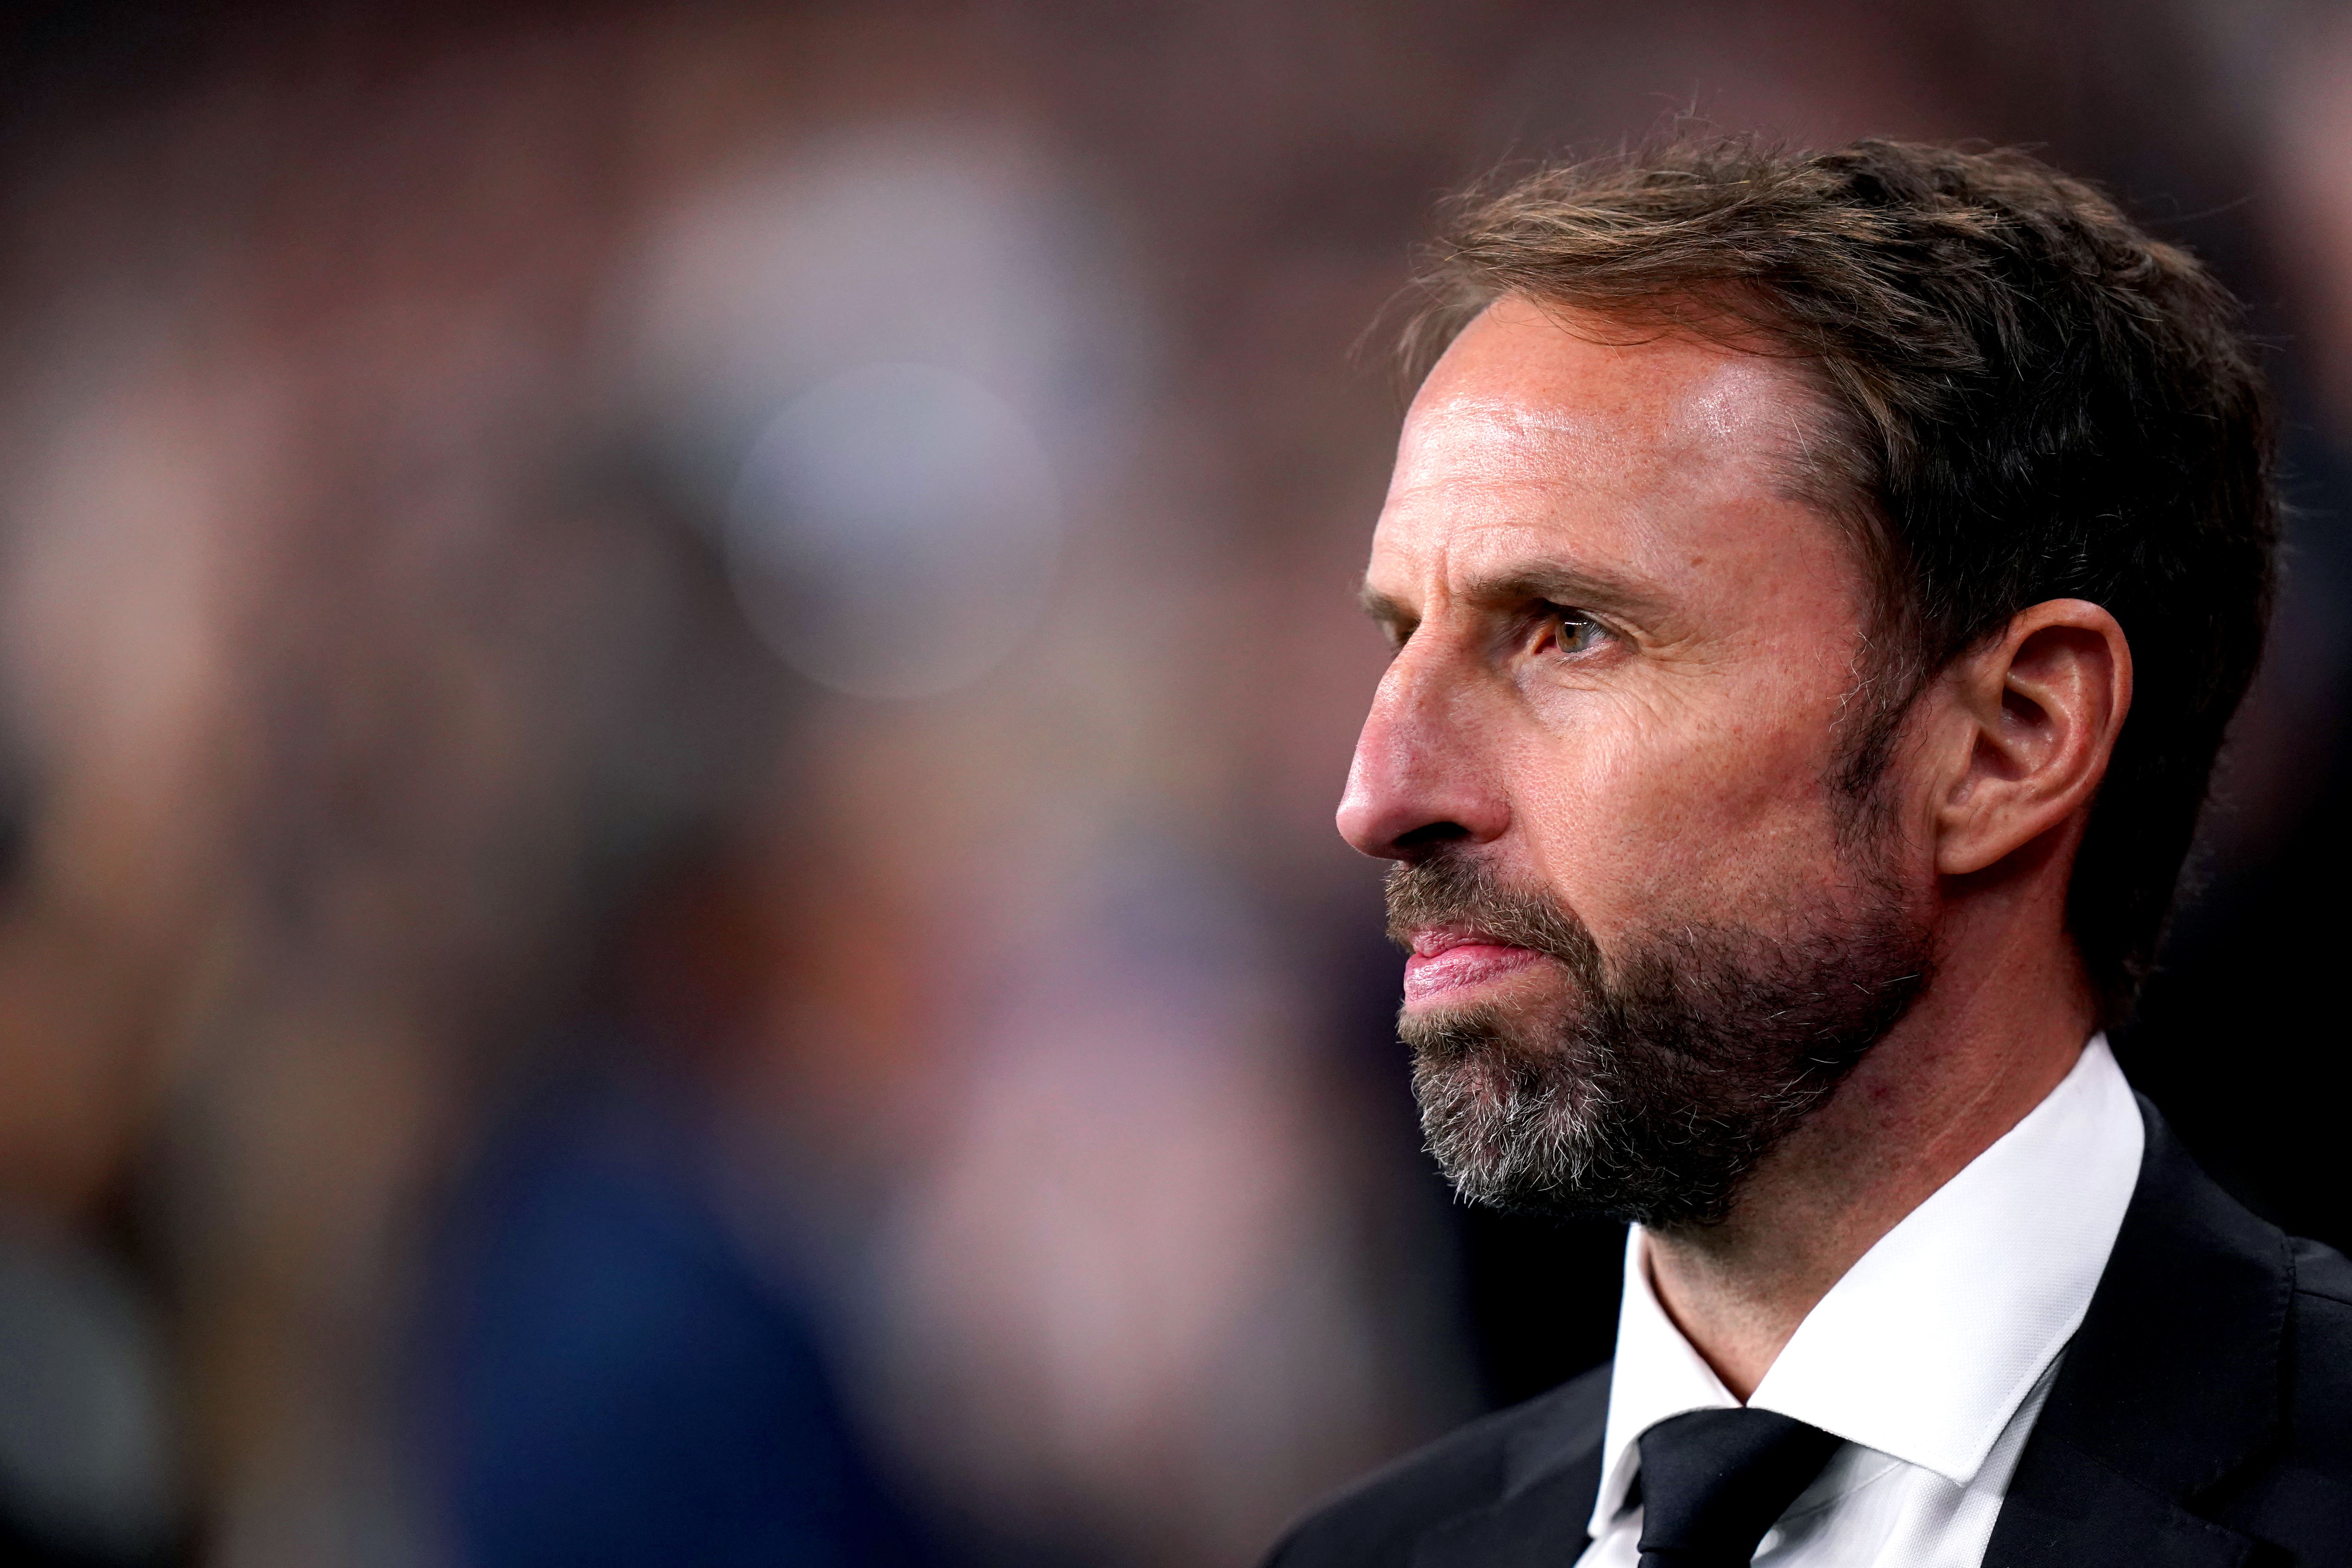 Gareth Southgate said workers in Qatar are “united” in wanting the World Cup to go ahead (John Walton/PA)